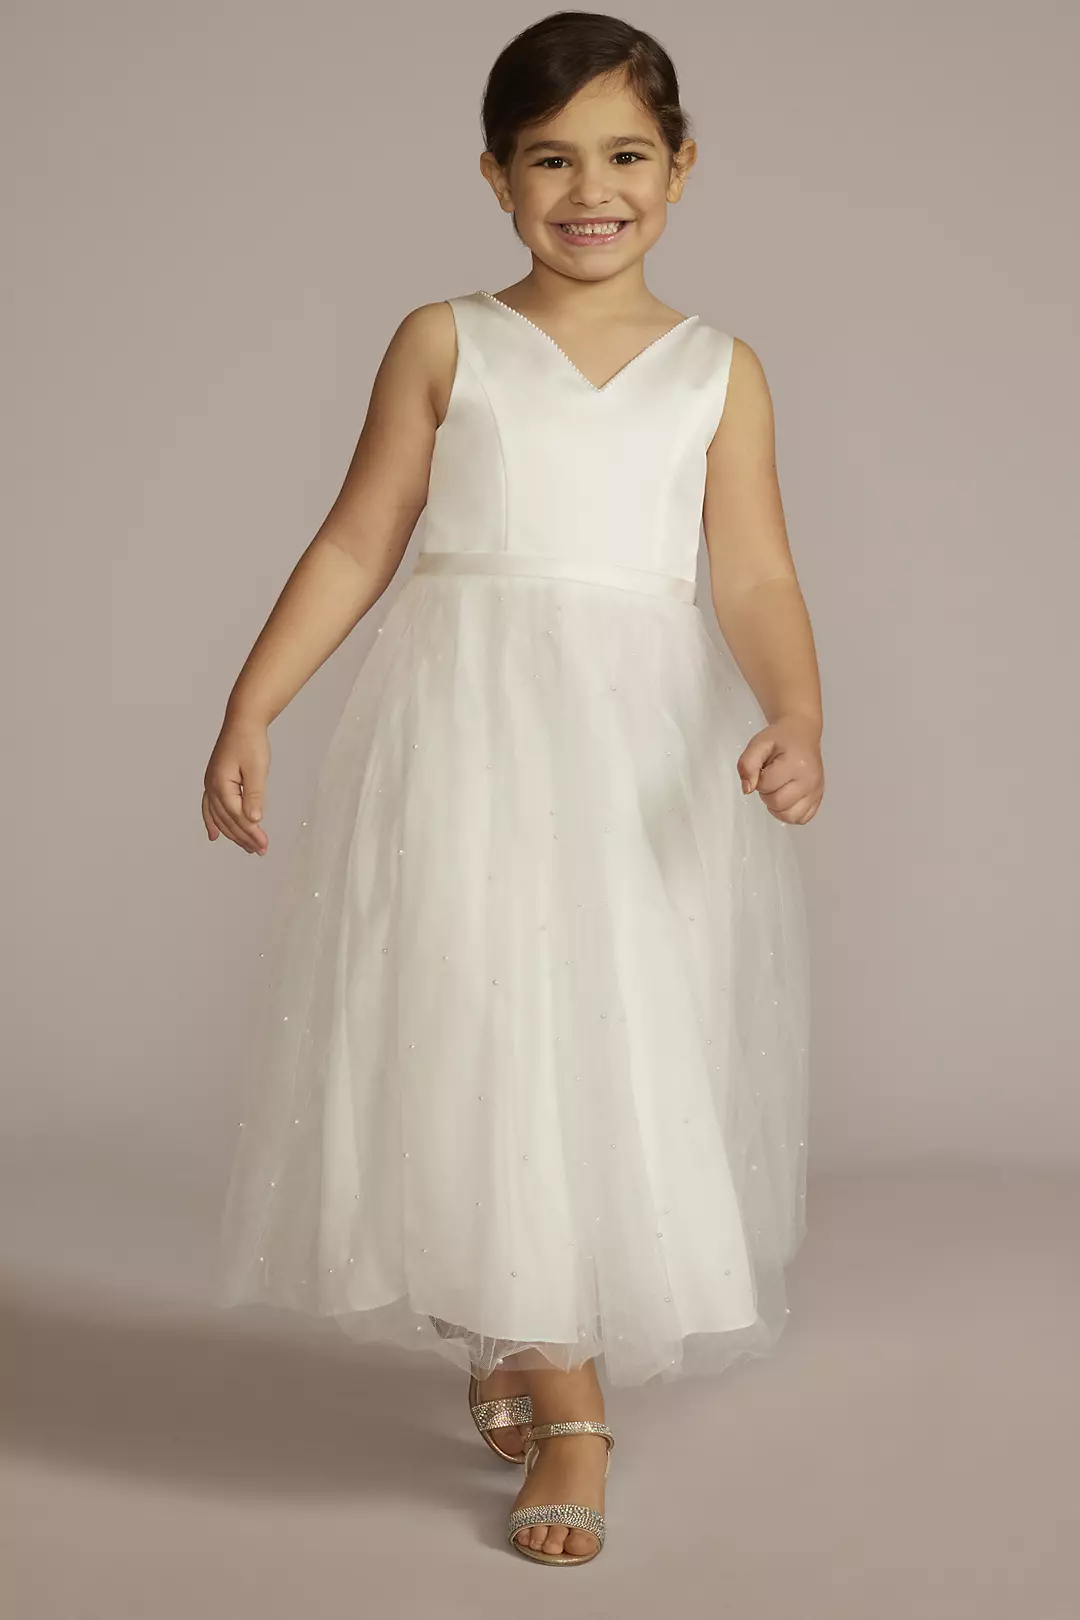 V-Back Tulle Flower Girl Dress with Pearls and Bow | David's Bridal